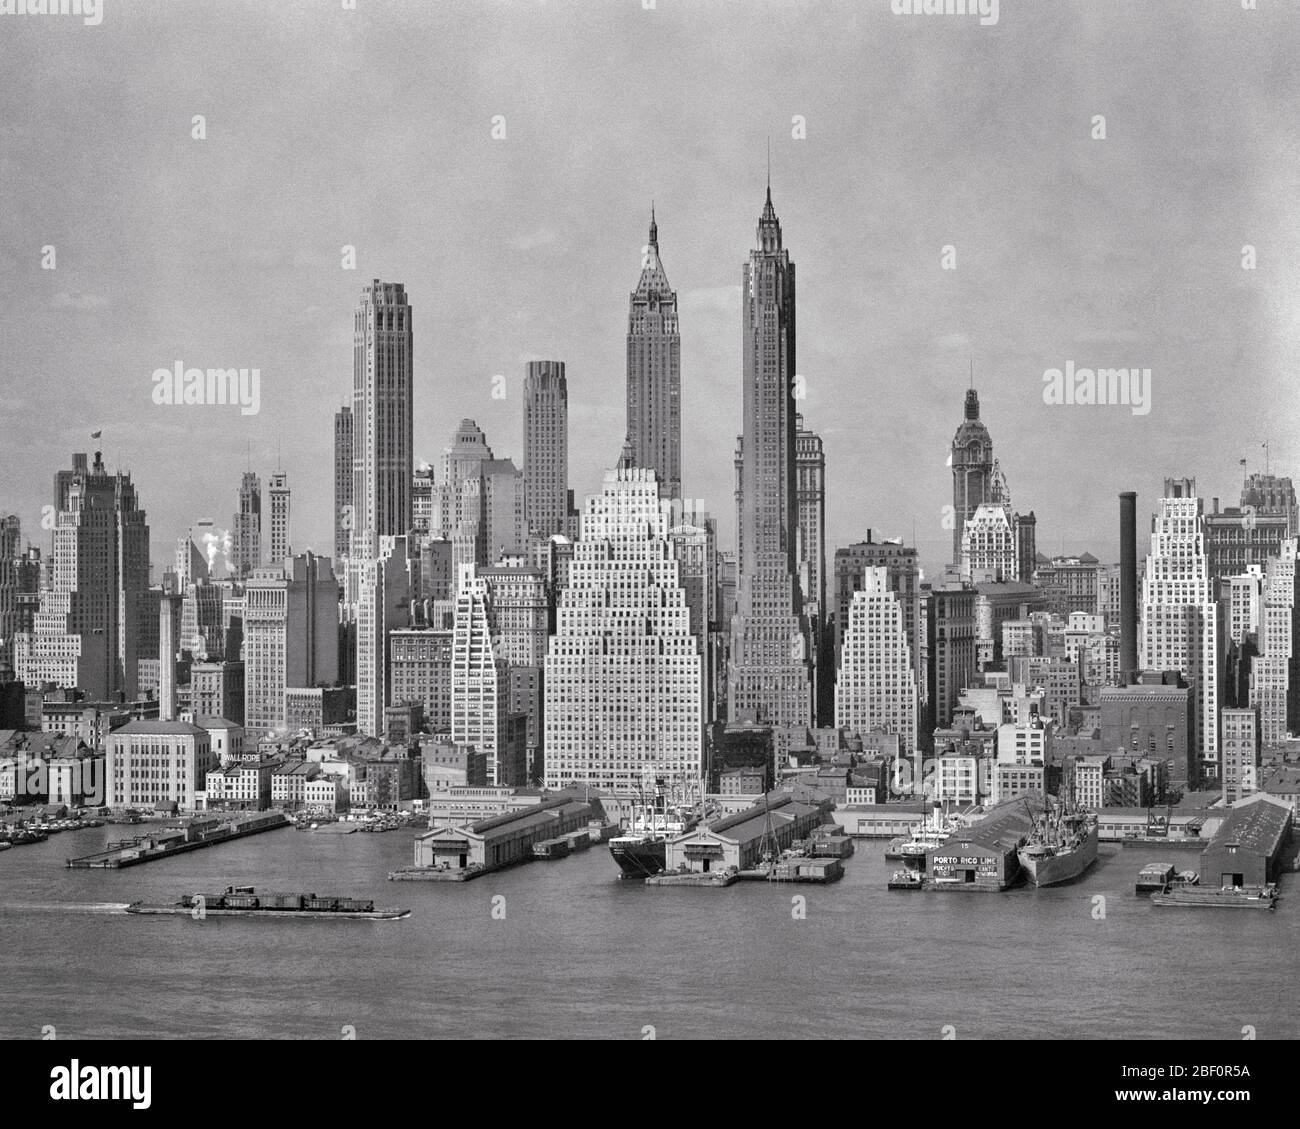 1940s SKYLINE OF DOWNTOWN FINANCIAL DISTRICT NYC SPIRES OF WOOLWORTH BUILDING IRVING TRUST AND 40 WALL STREET FROM BROOKLYN - r4127 HAR001 HARS WOOLWORTH NYC REAL ESTATE CONCEPTUAL NEW YORK STRUCTURES CITIES EDIFICE NEW YORK CITY PANORAMIC WATERFRONT BLACK AND WHITE DISTRICT EAST RIVER HAR001 IRVING OLD FASHIONED PIERS SKYLINES SKYSCRAPERS SPIRES Stock Photo